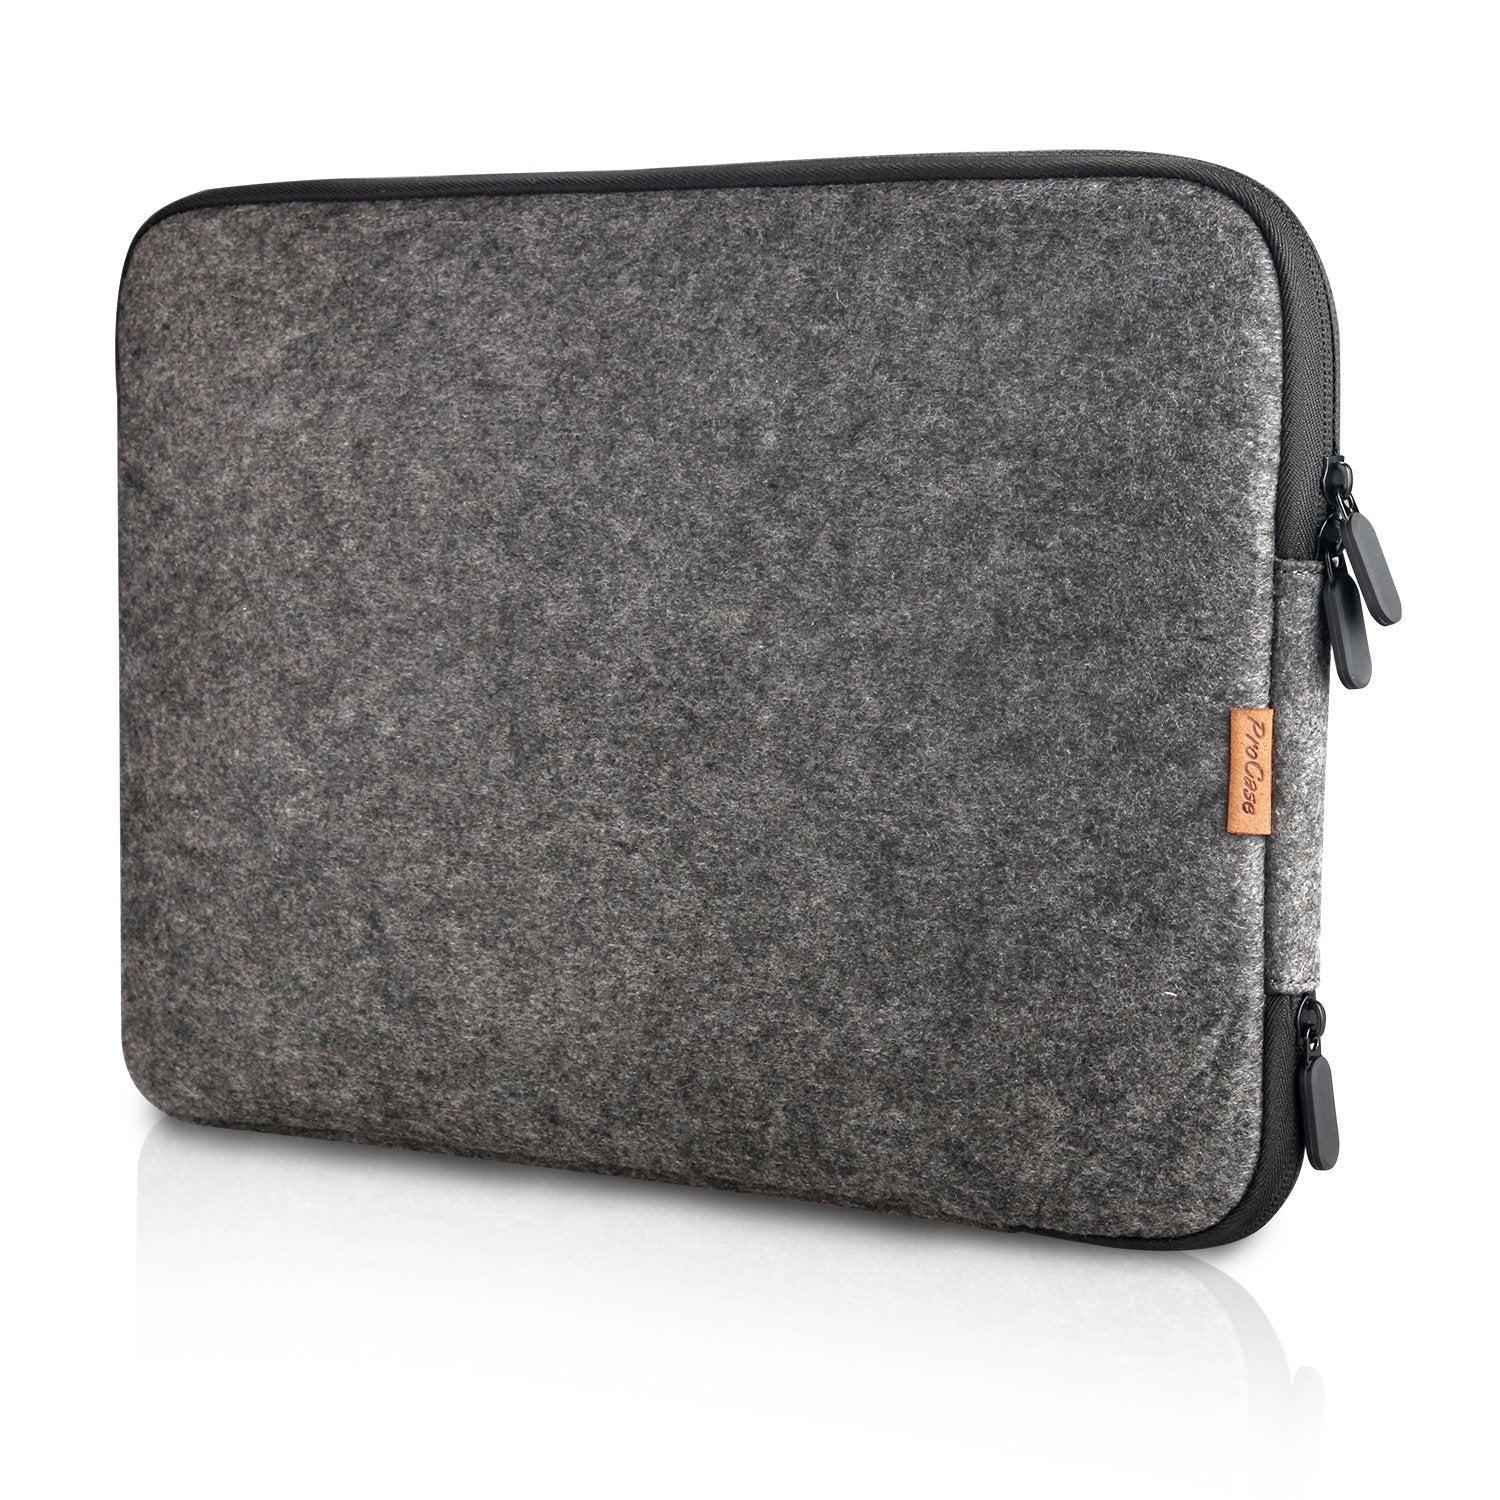 Tablet Laptop Sleeve Case Protective Carrying Bag | ProCase